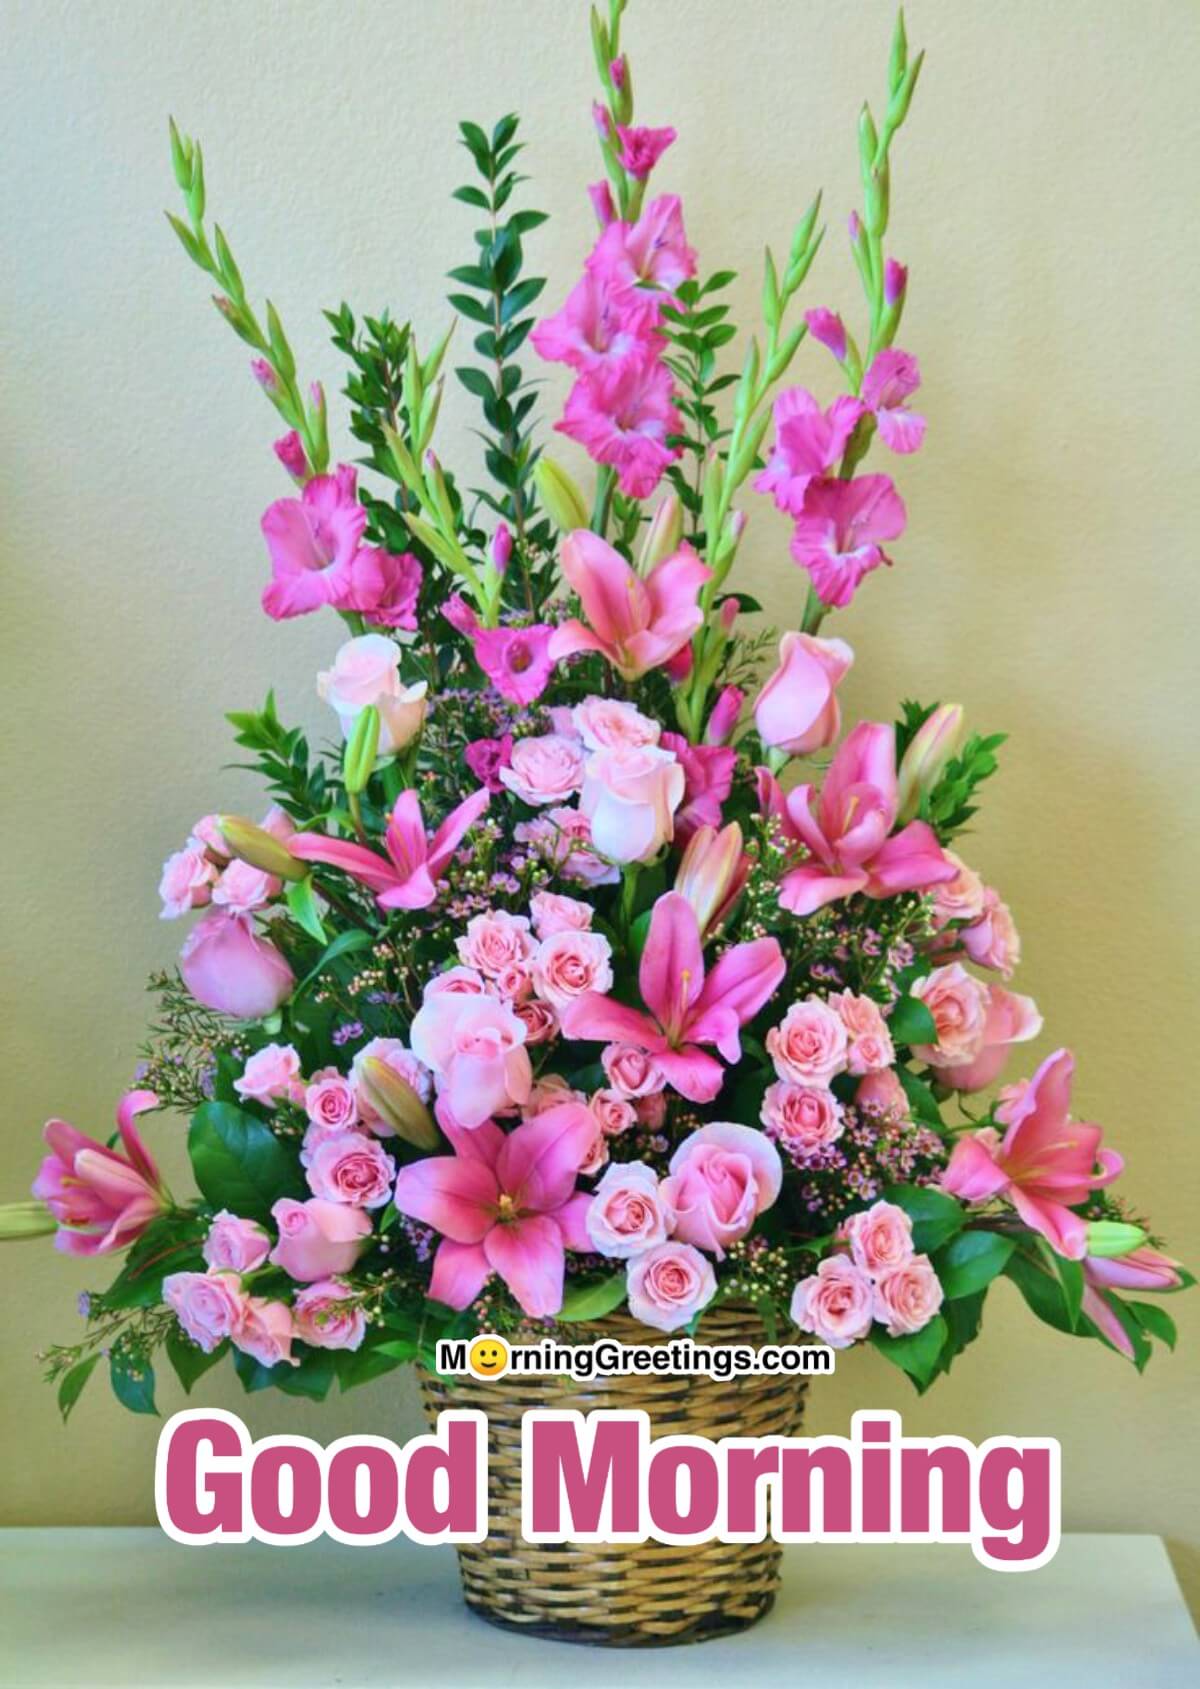 20 Morning Greeting With Bouquet Morning Greetings Morning Wishes